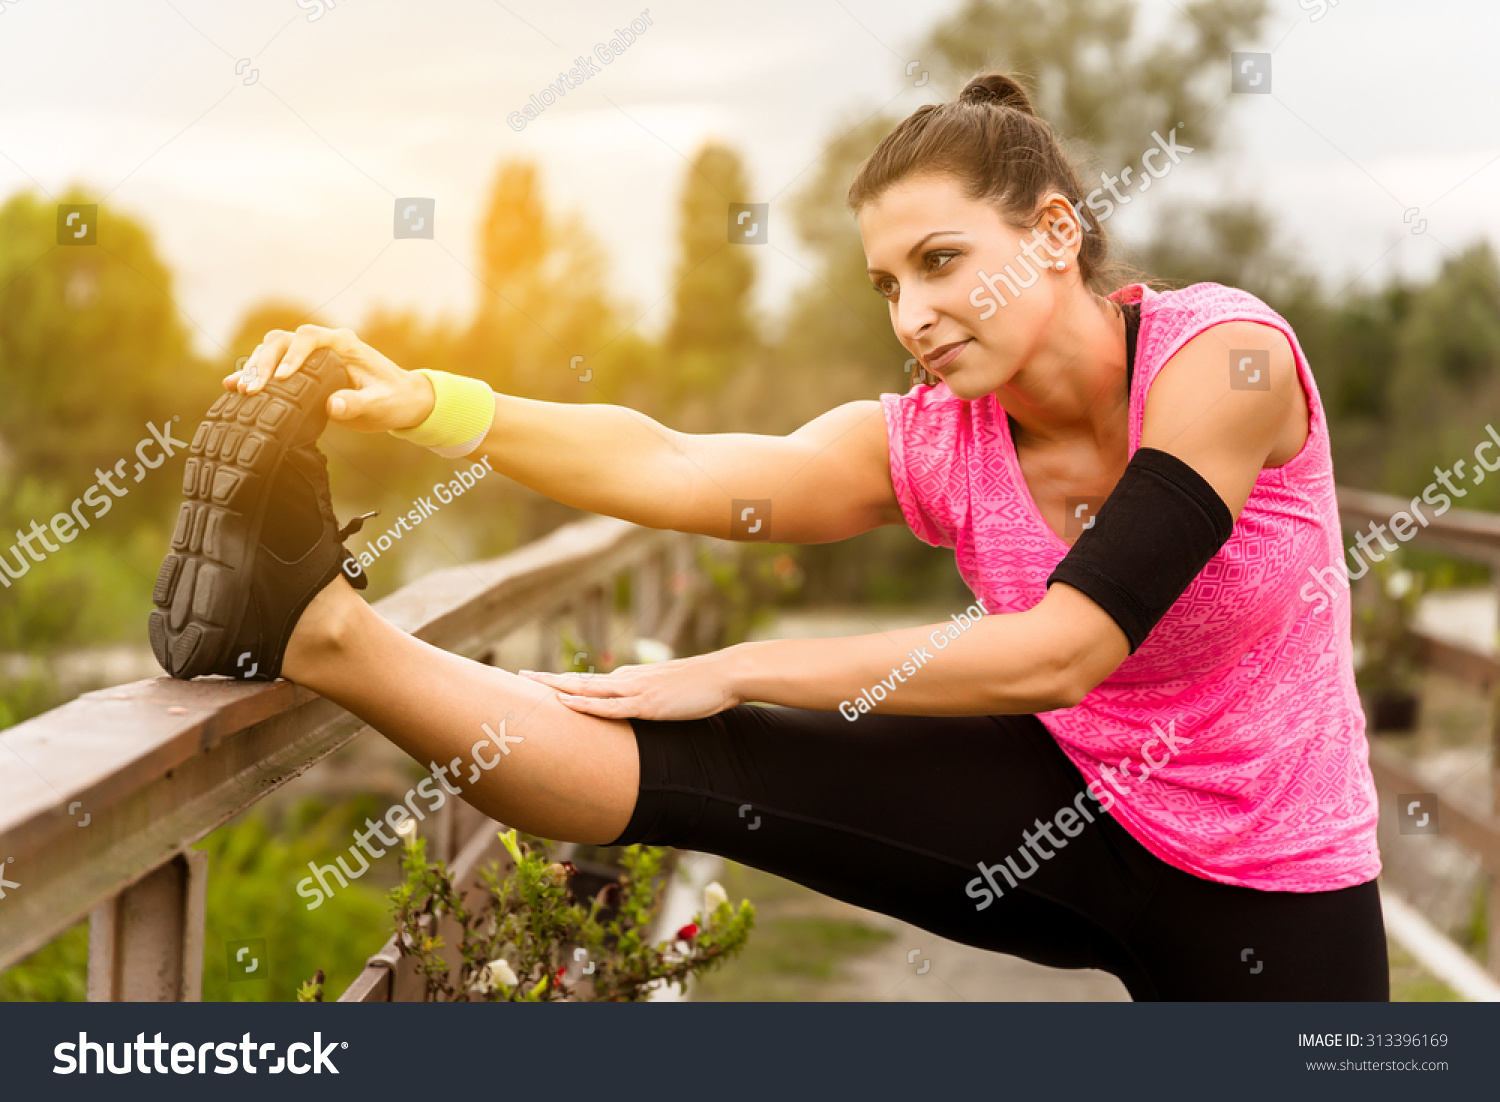 Attractive young runner woman doing stretching exercises. #313396169